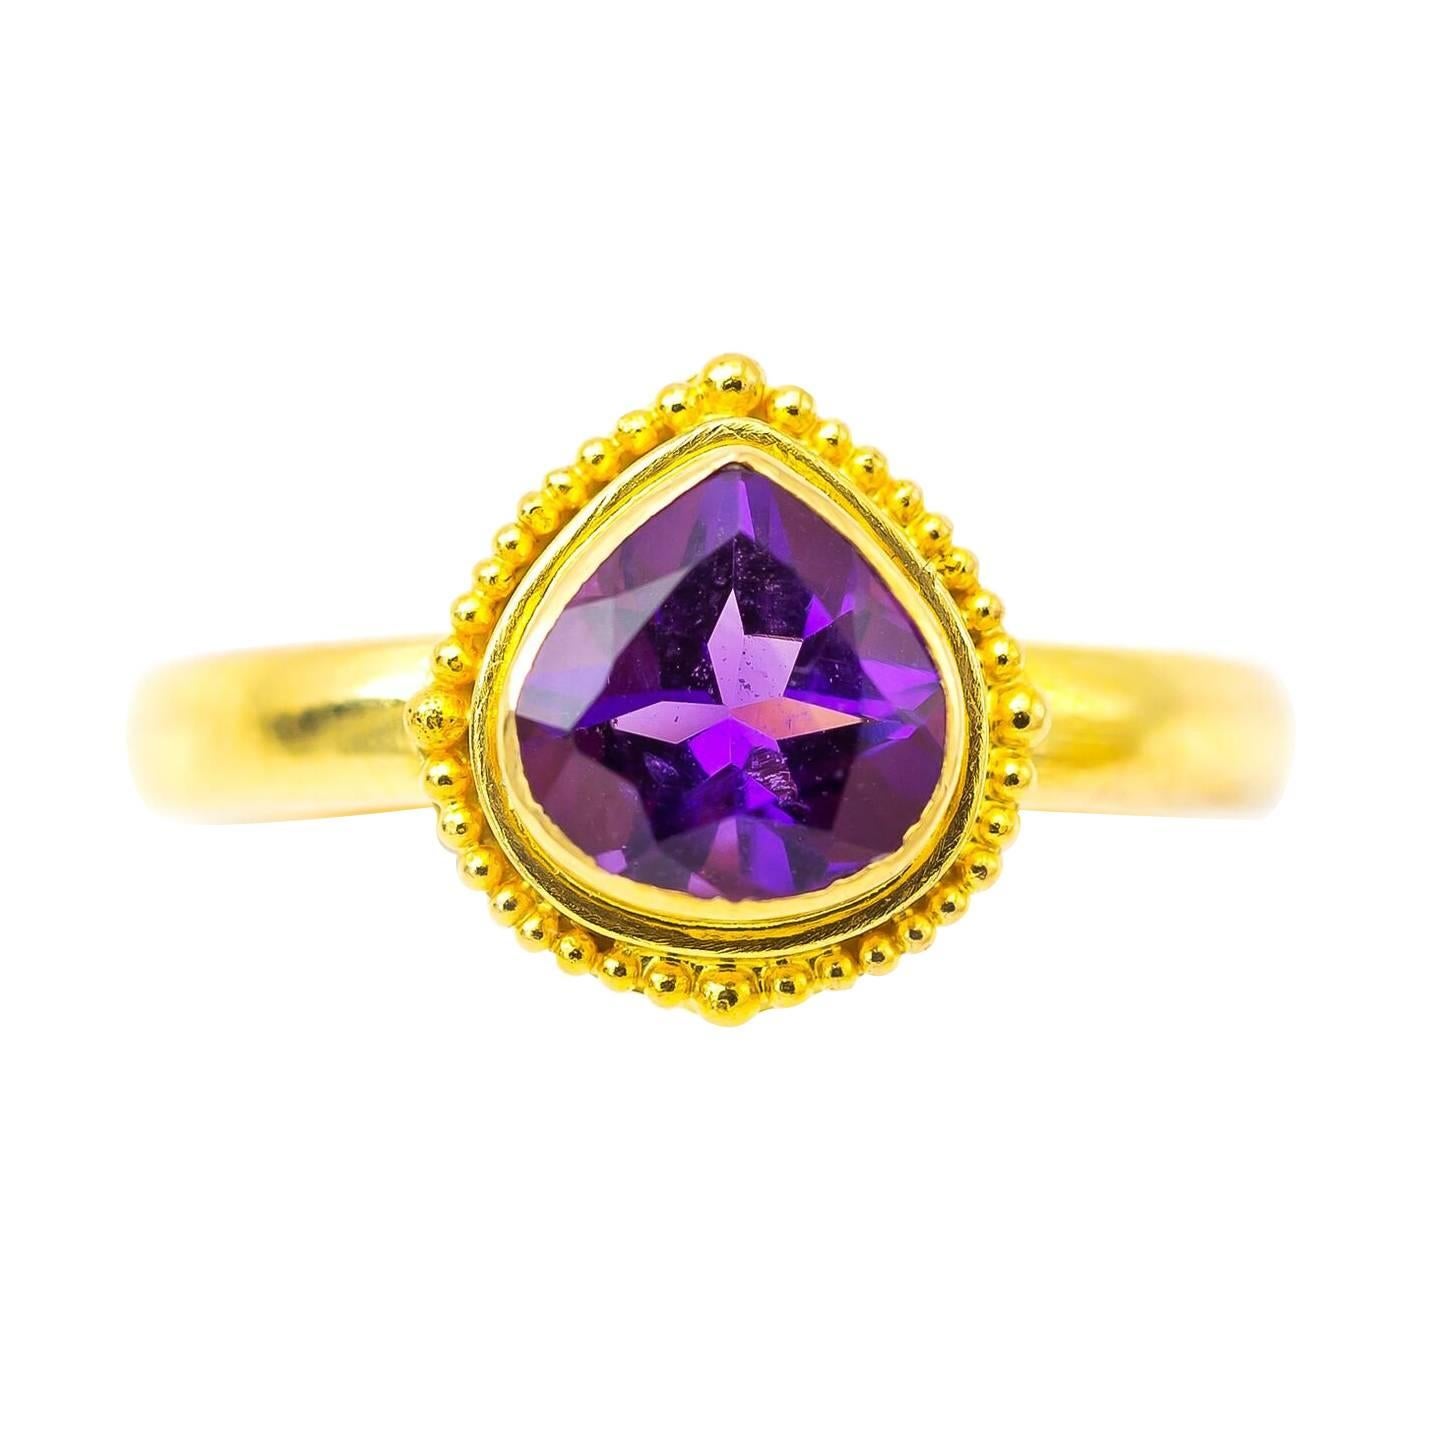 Pear Shaped Amethyst in Detailed Gold Bezel Ring